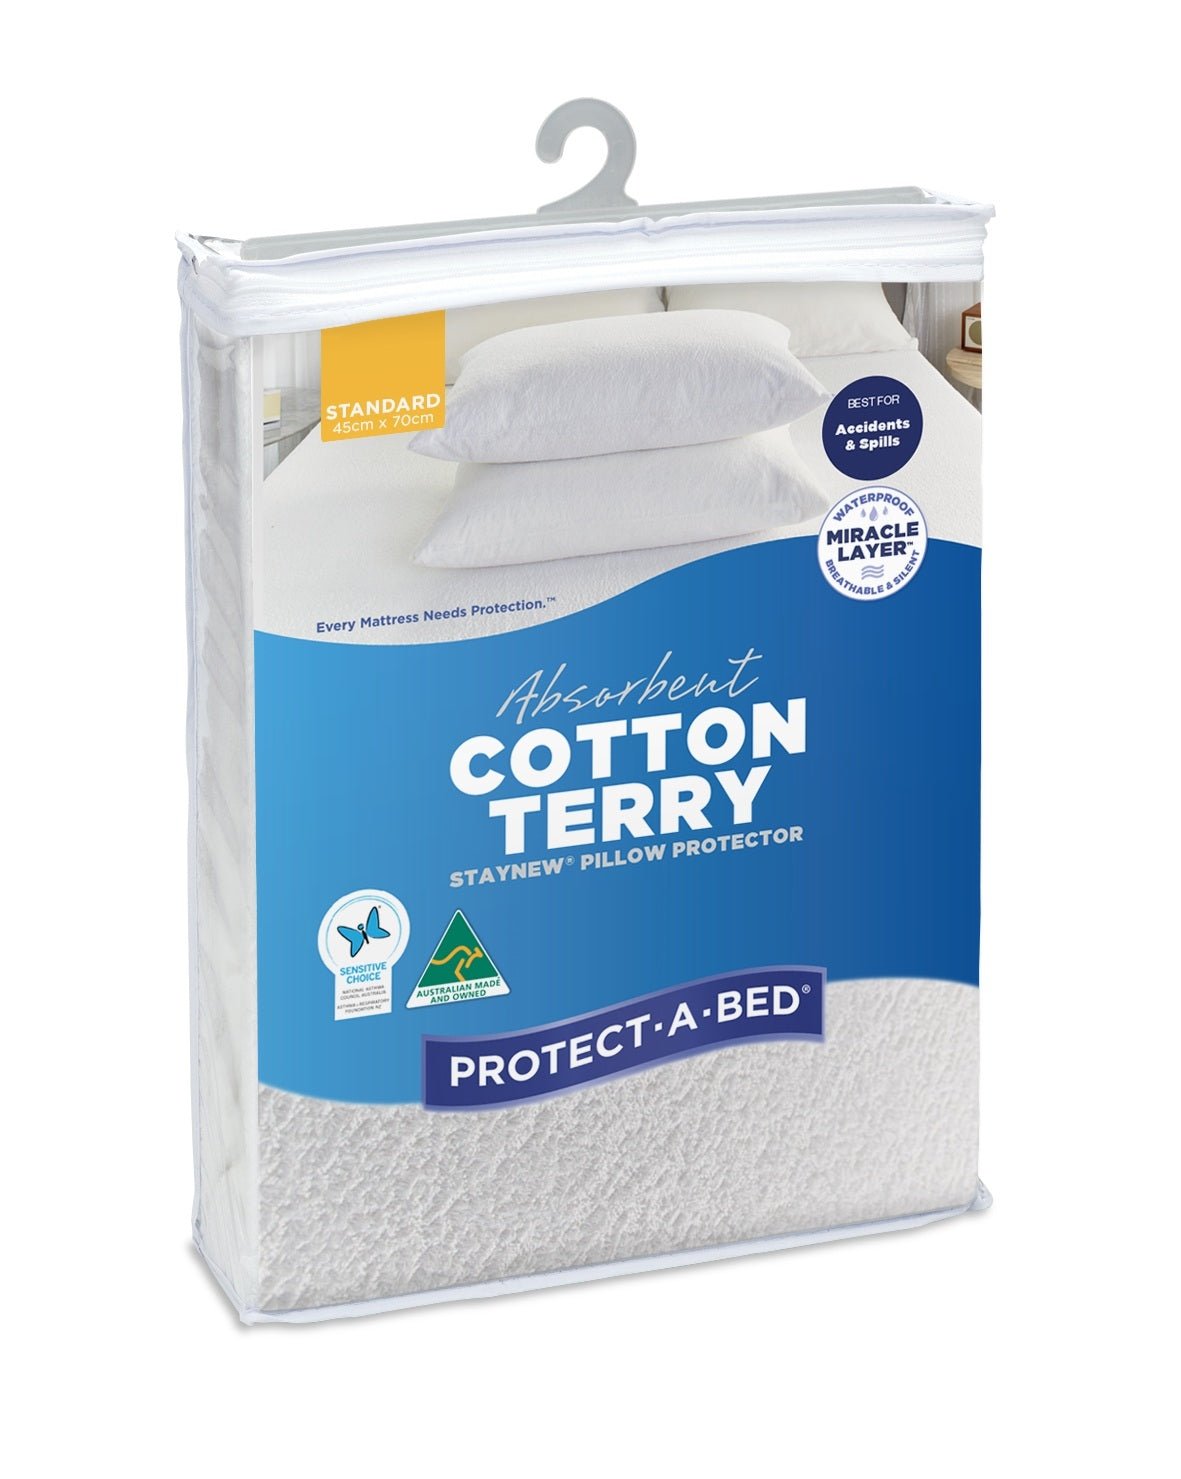 Protect-A-Bed Staynew Pillow Protector - Mattress & Pillow ScienceProtection